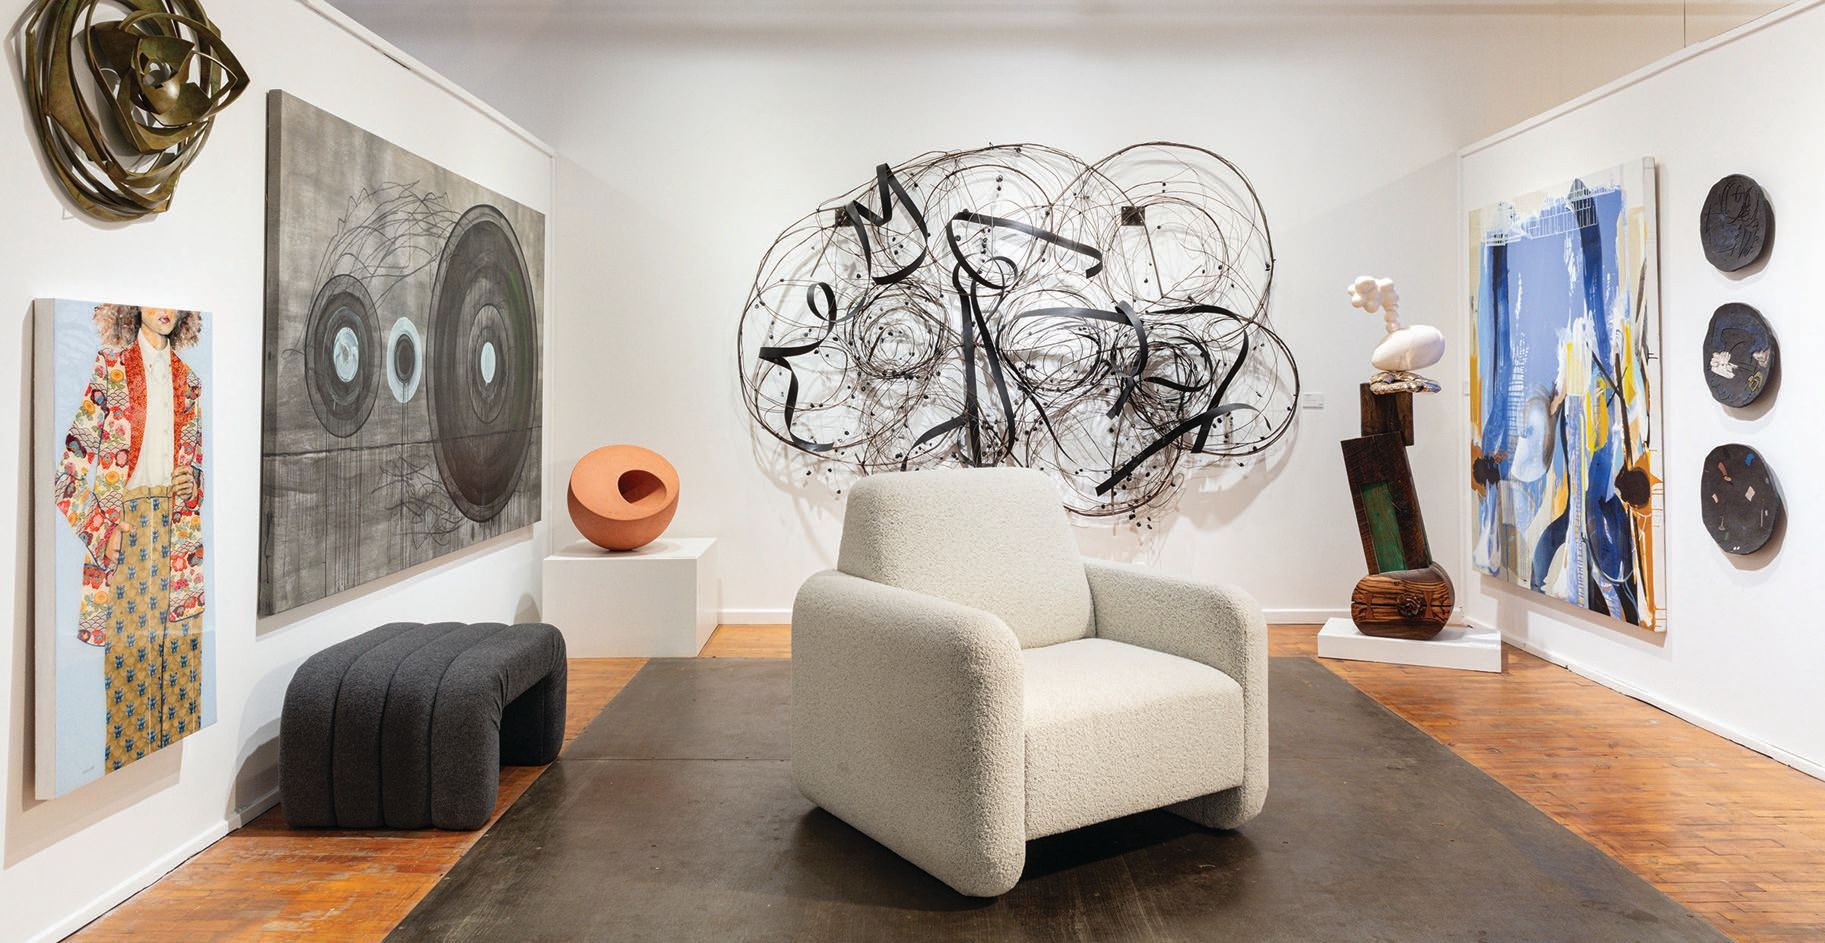 Alma Art and Interiors seamlessly blends the worlds of visual art and home design. PHOTO BY: TRAVIS ROOZEE